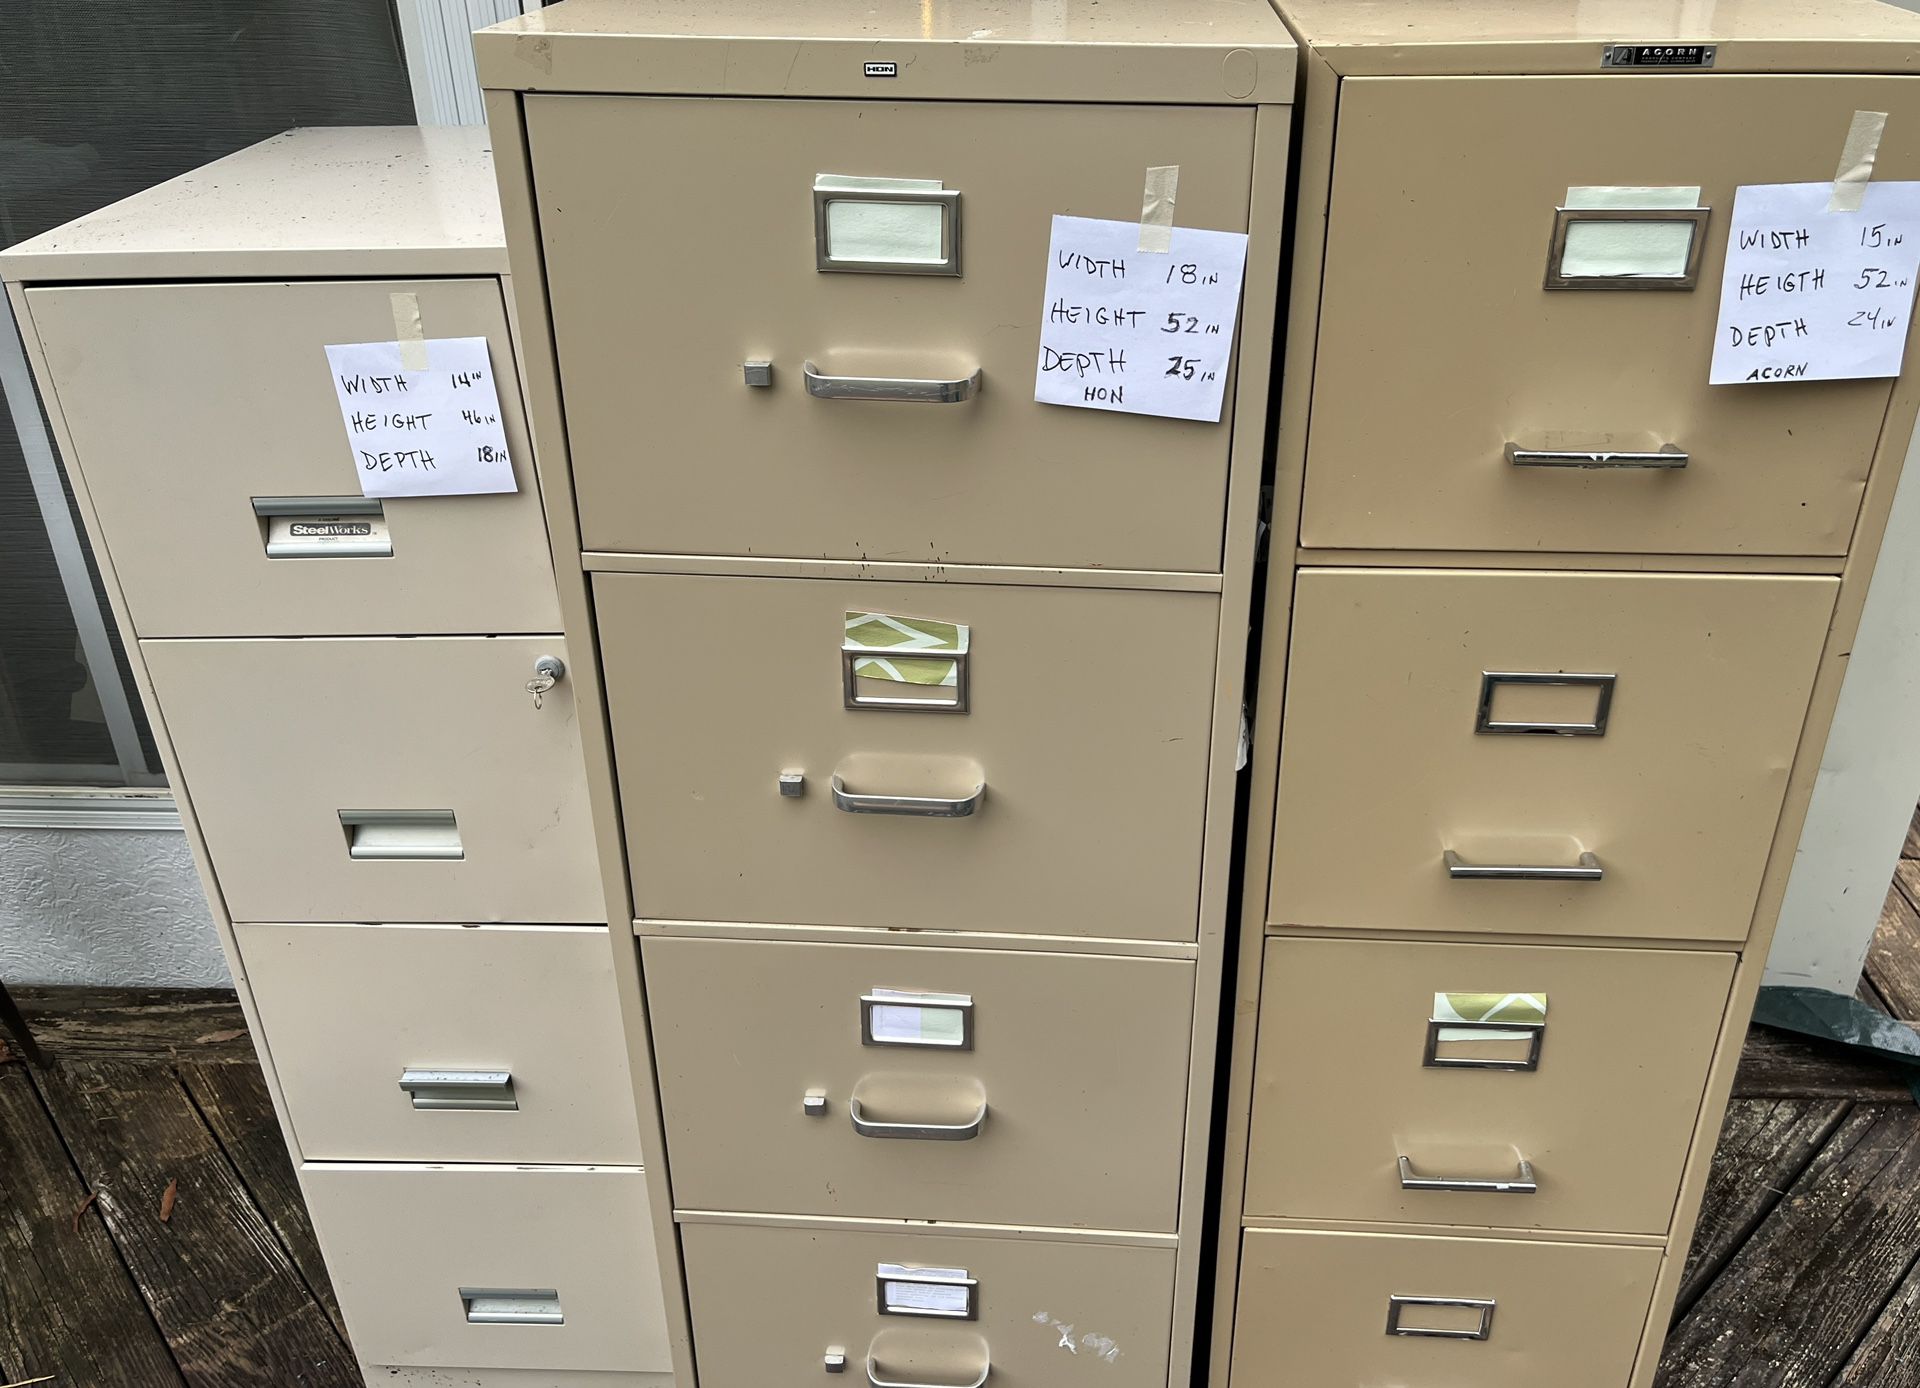 Various File Cabinet